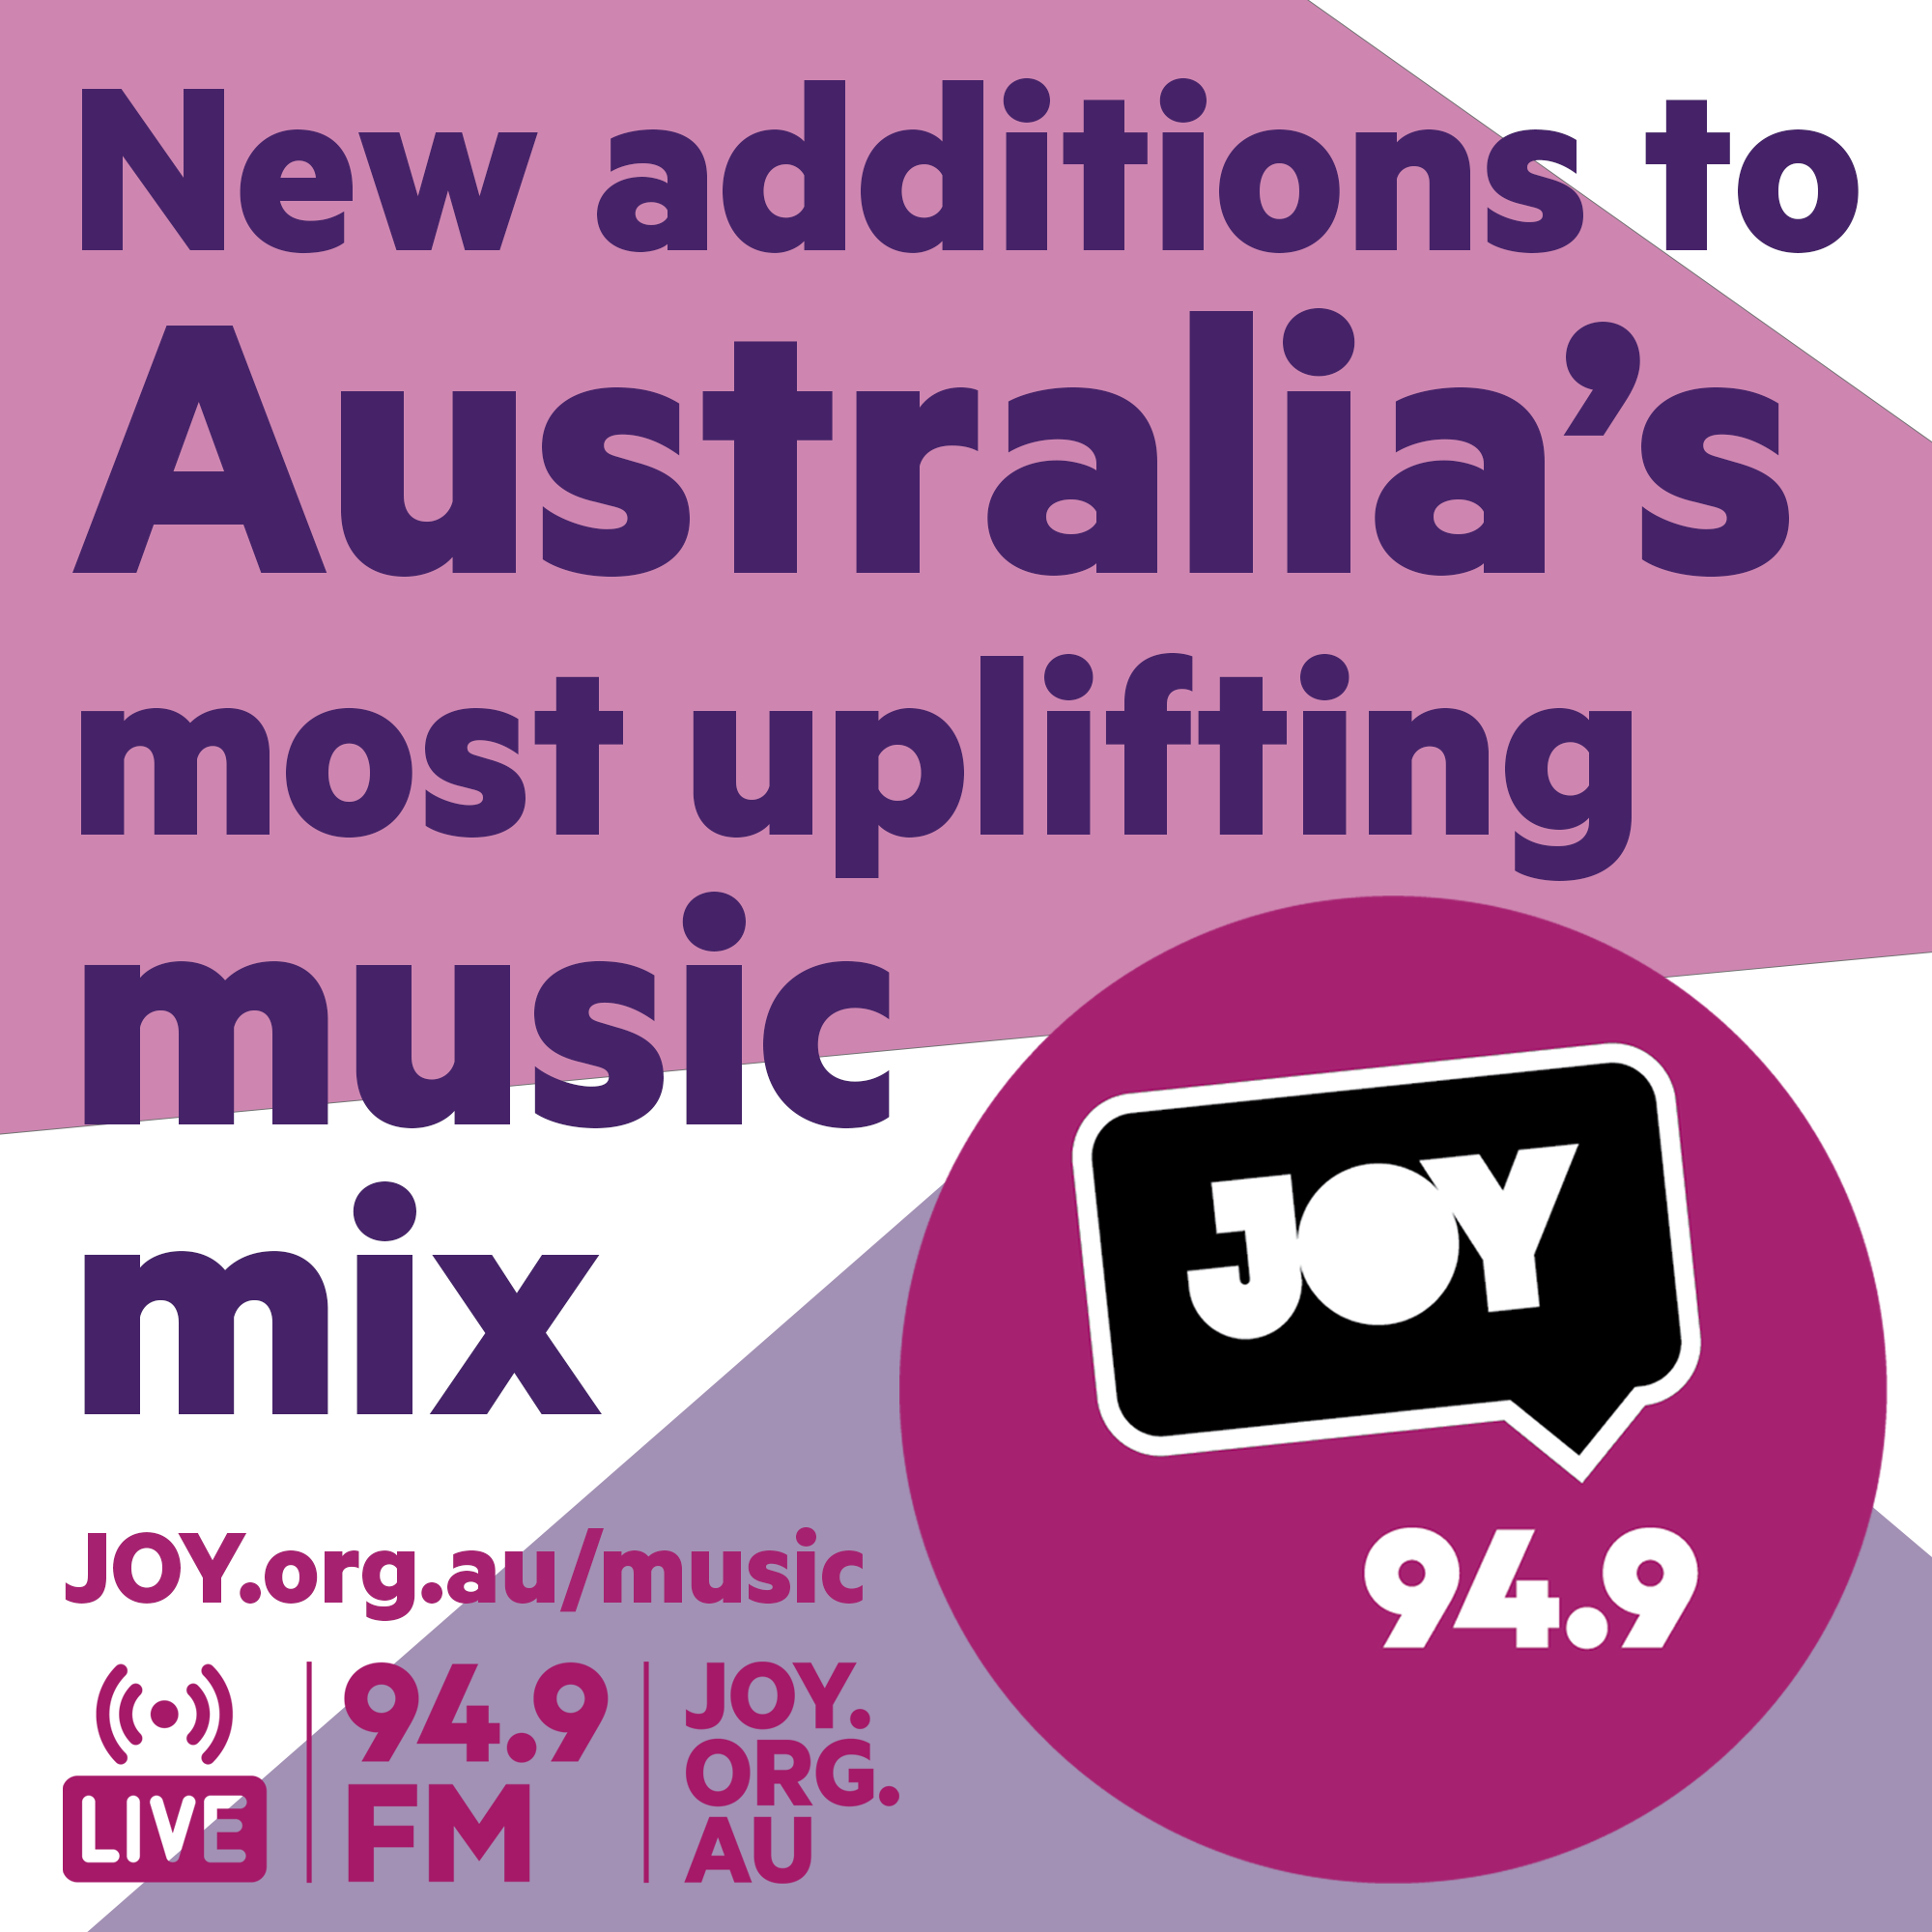 The newest songs to Australia’s most uplifting music mix: 23 February 2022